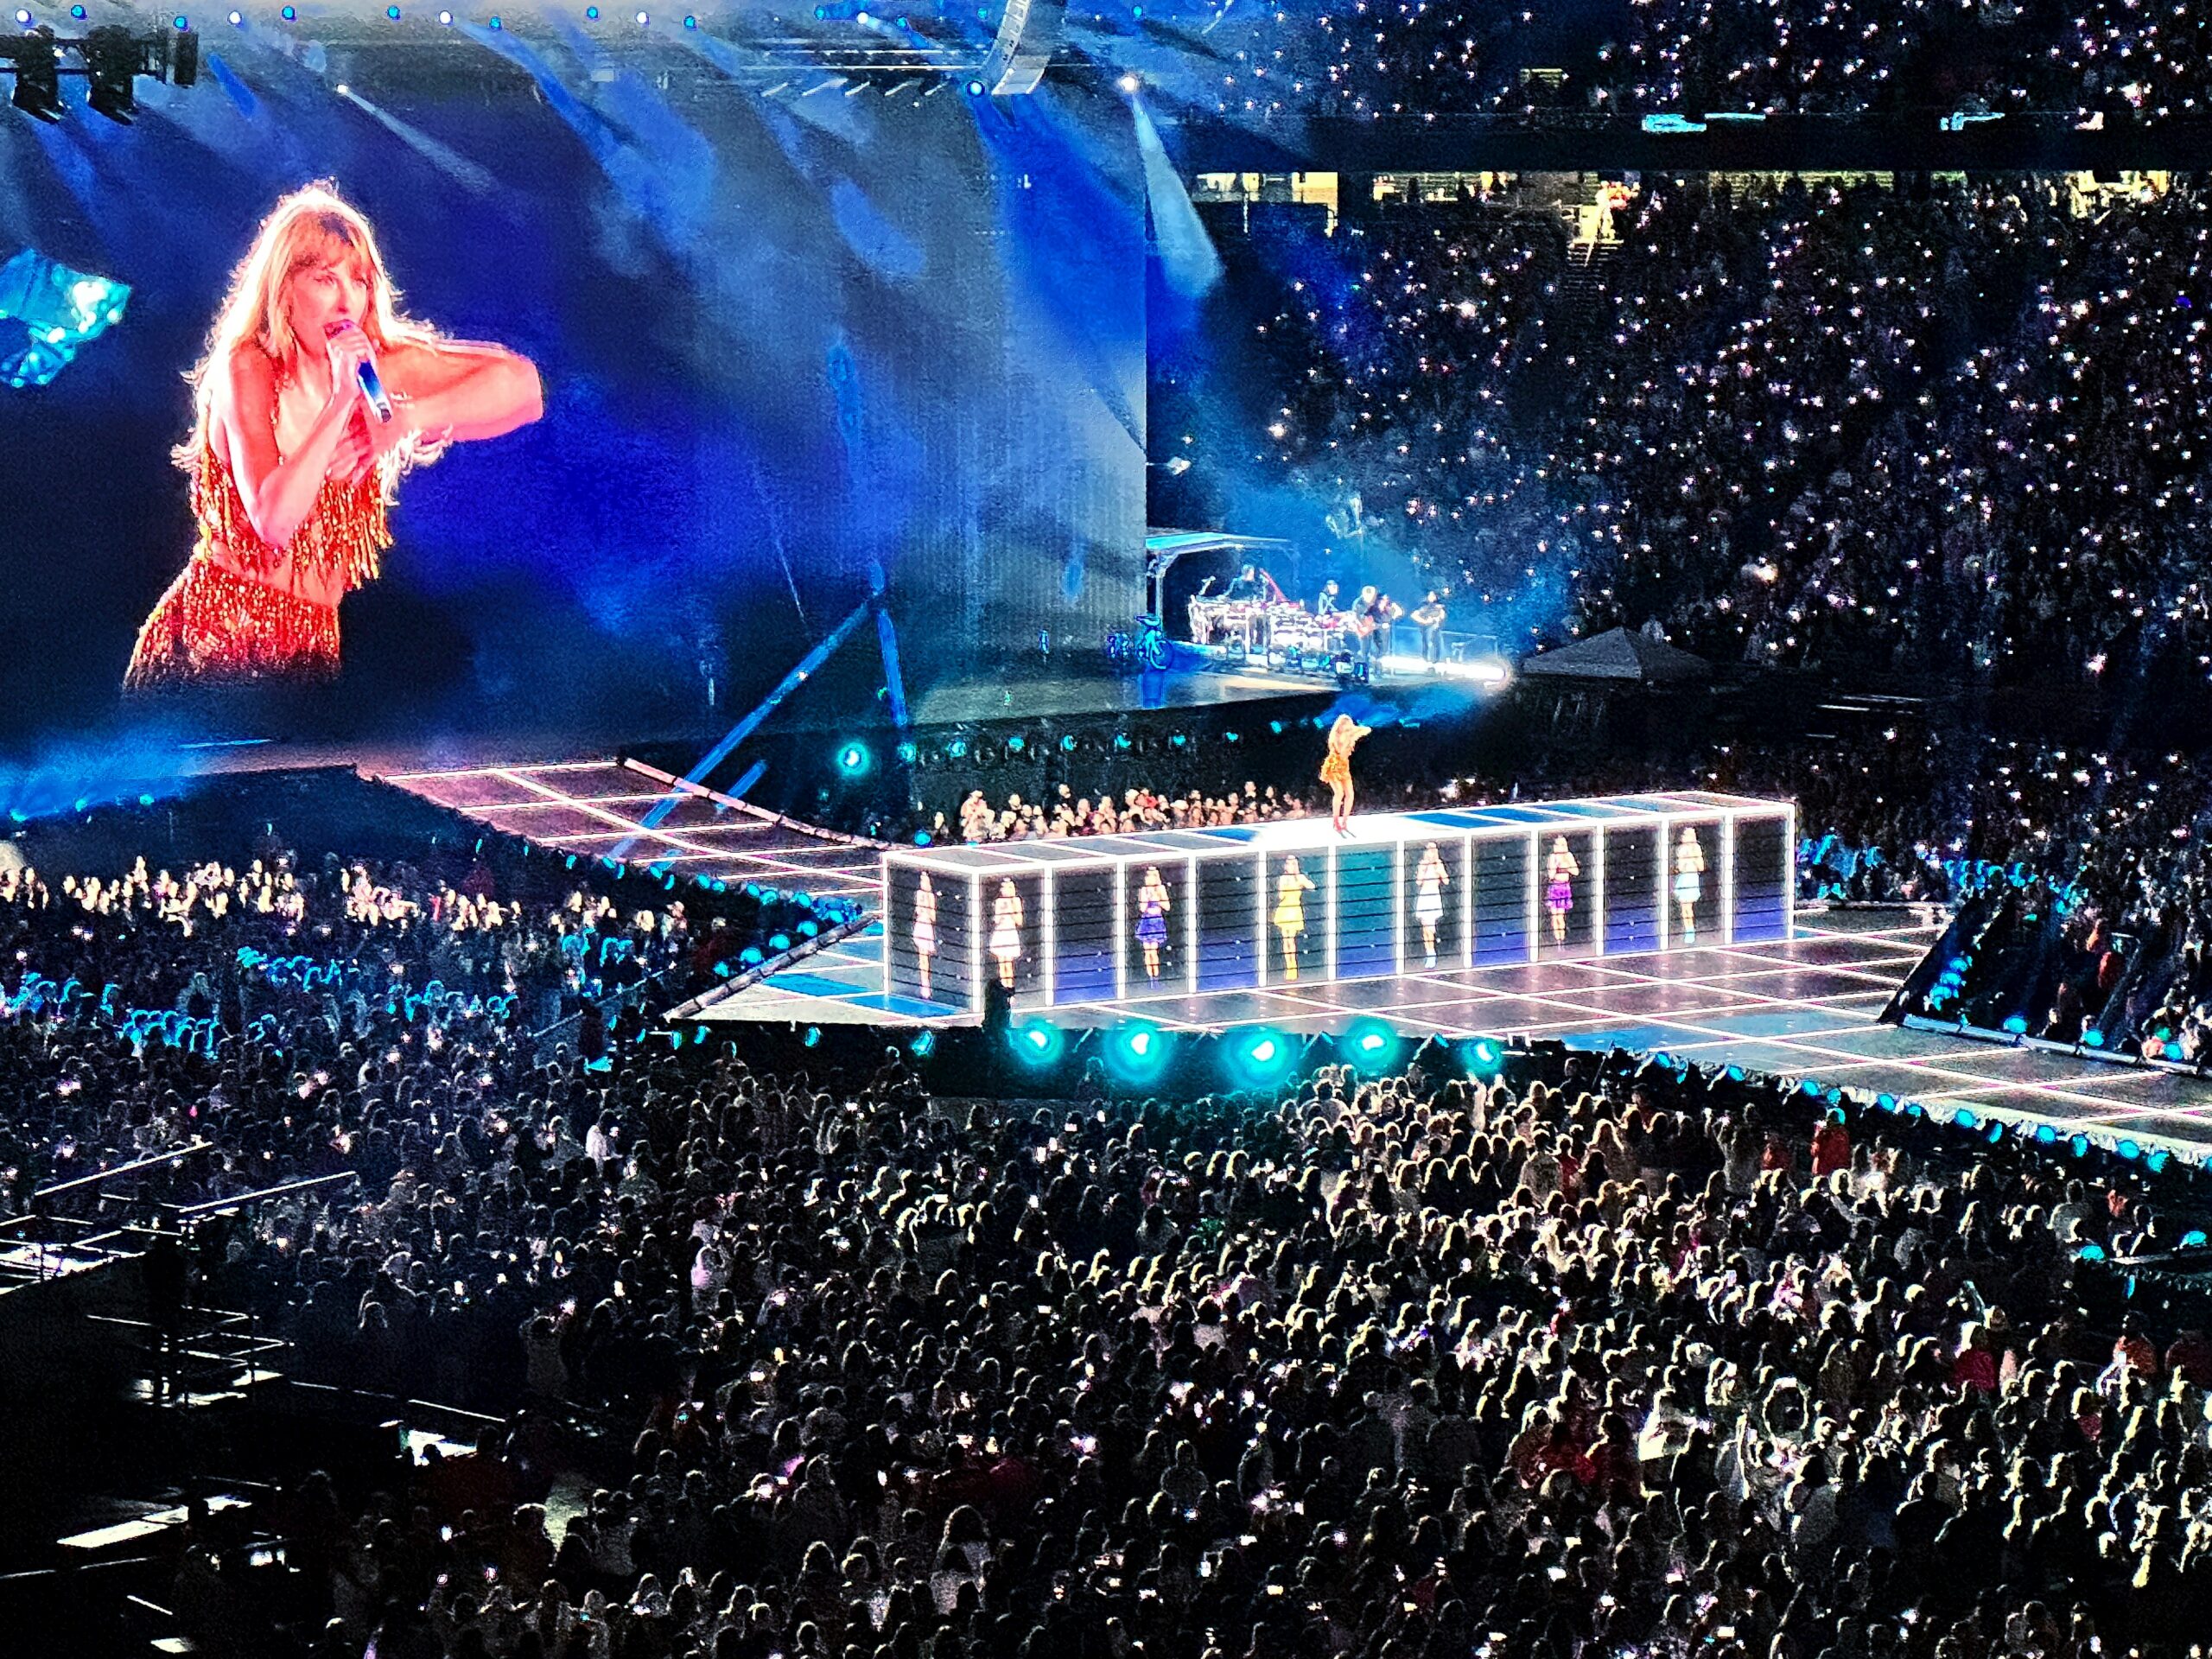 Taylor Swift performed at Gillette Stadium in May as part of the US Era's Tour.